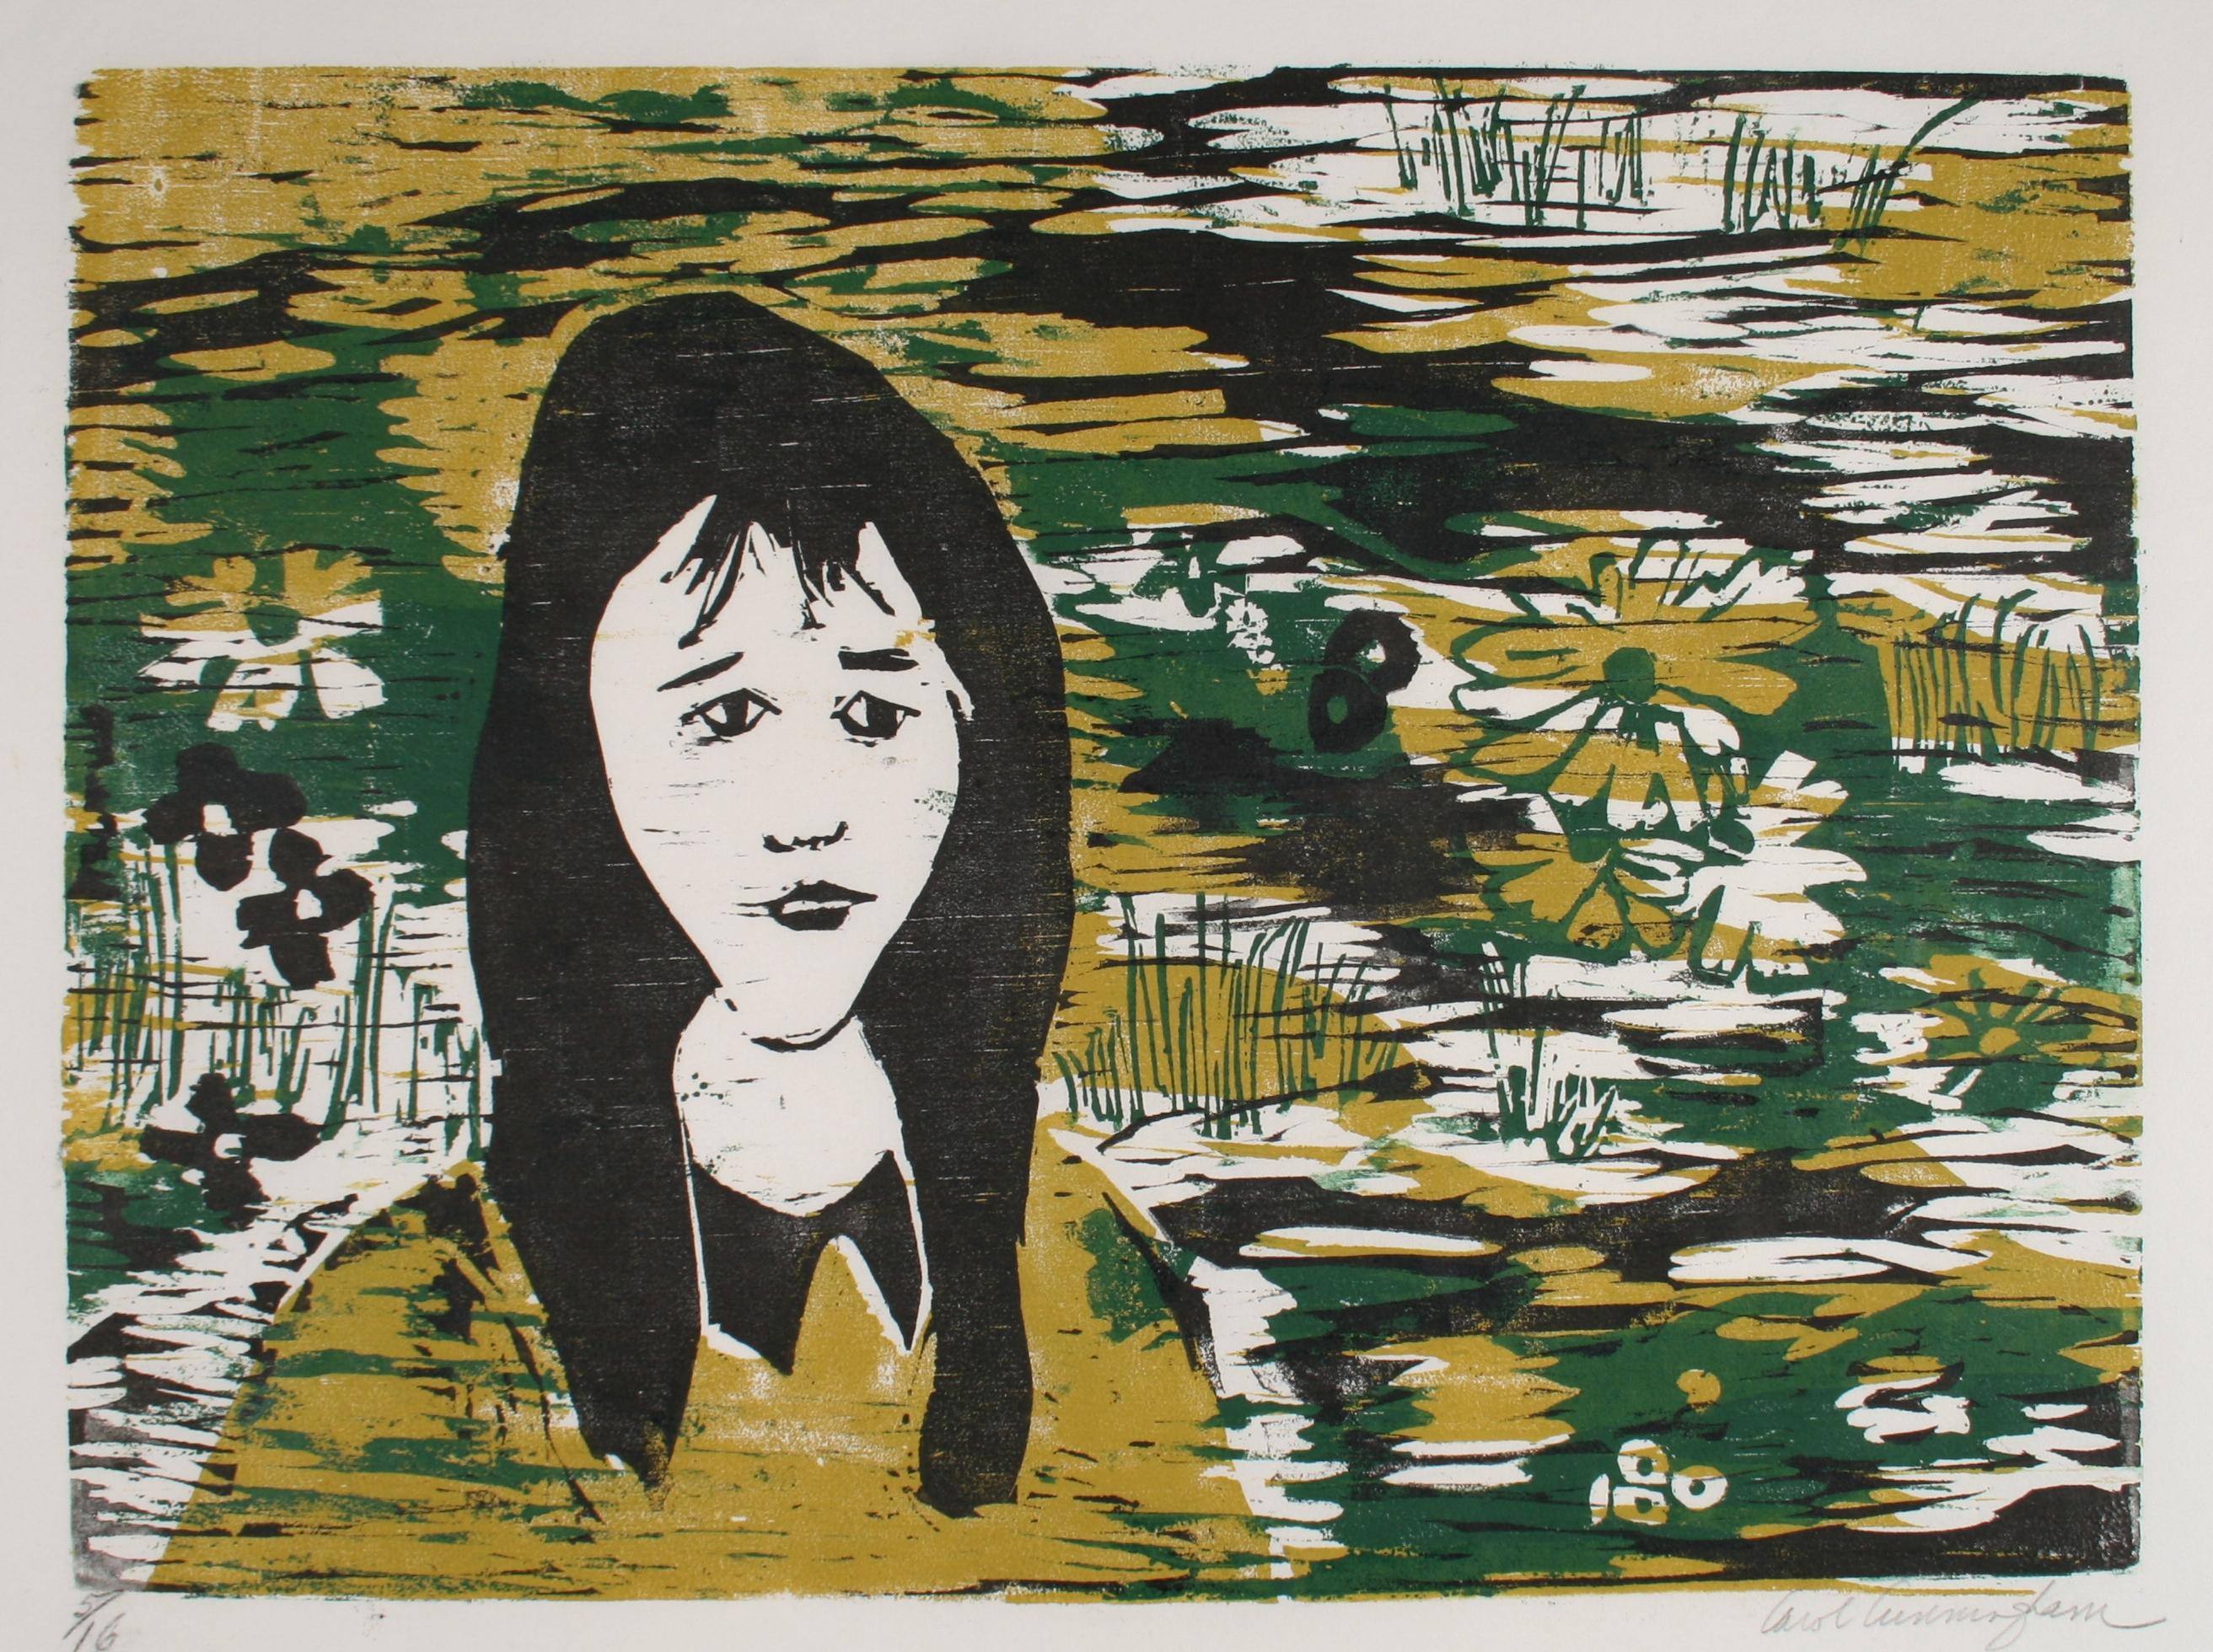 Portrait Of A Woman With Flowers 1960-70s Gold and Green Woodcut